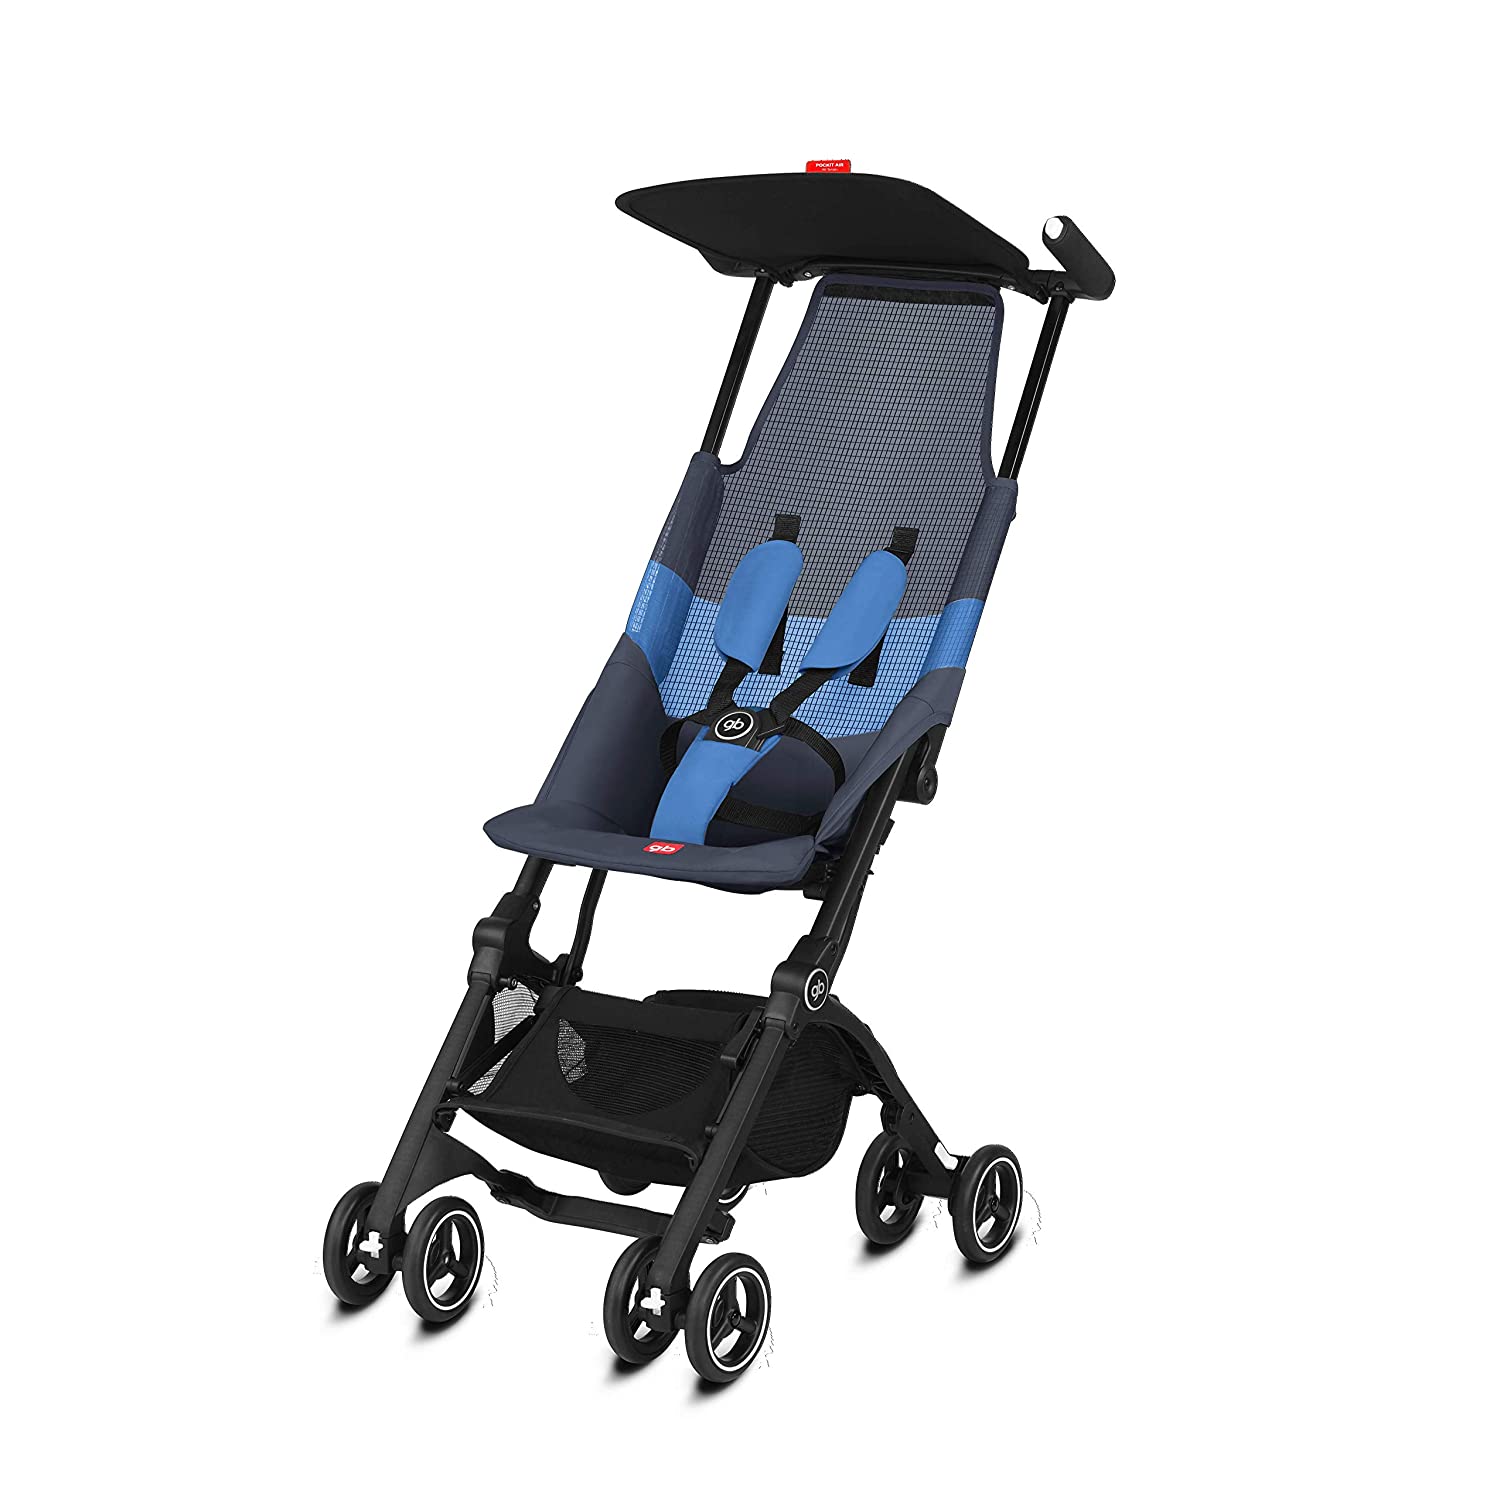 Cybex Pockit Plus All-Terrain Ultra Compact Lightweight Stroller with Breathable Fabric - ANB Baby -10 lbs.